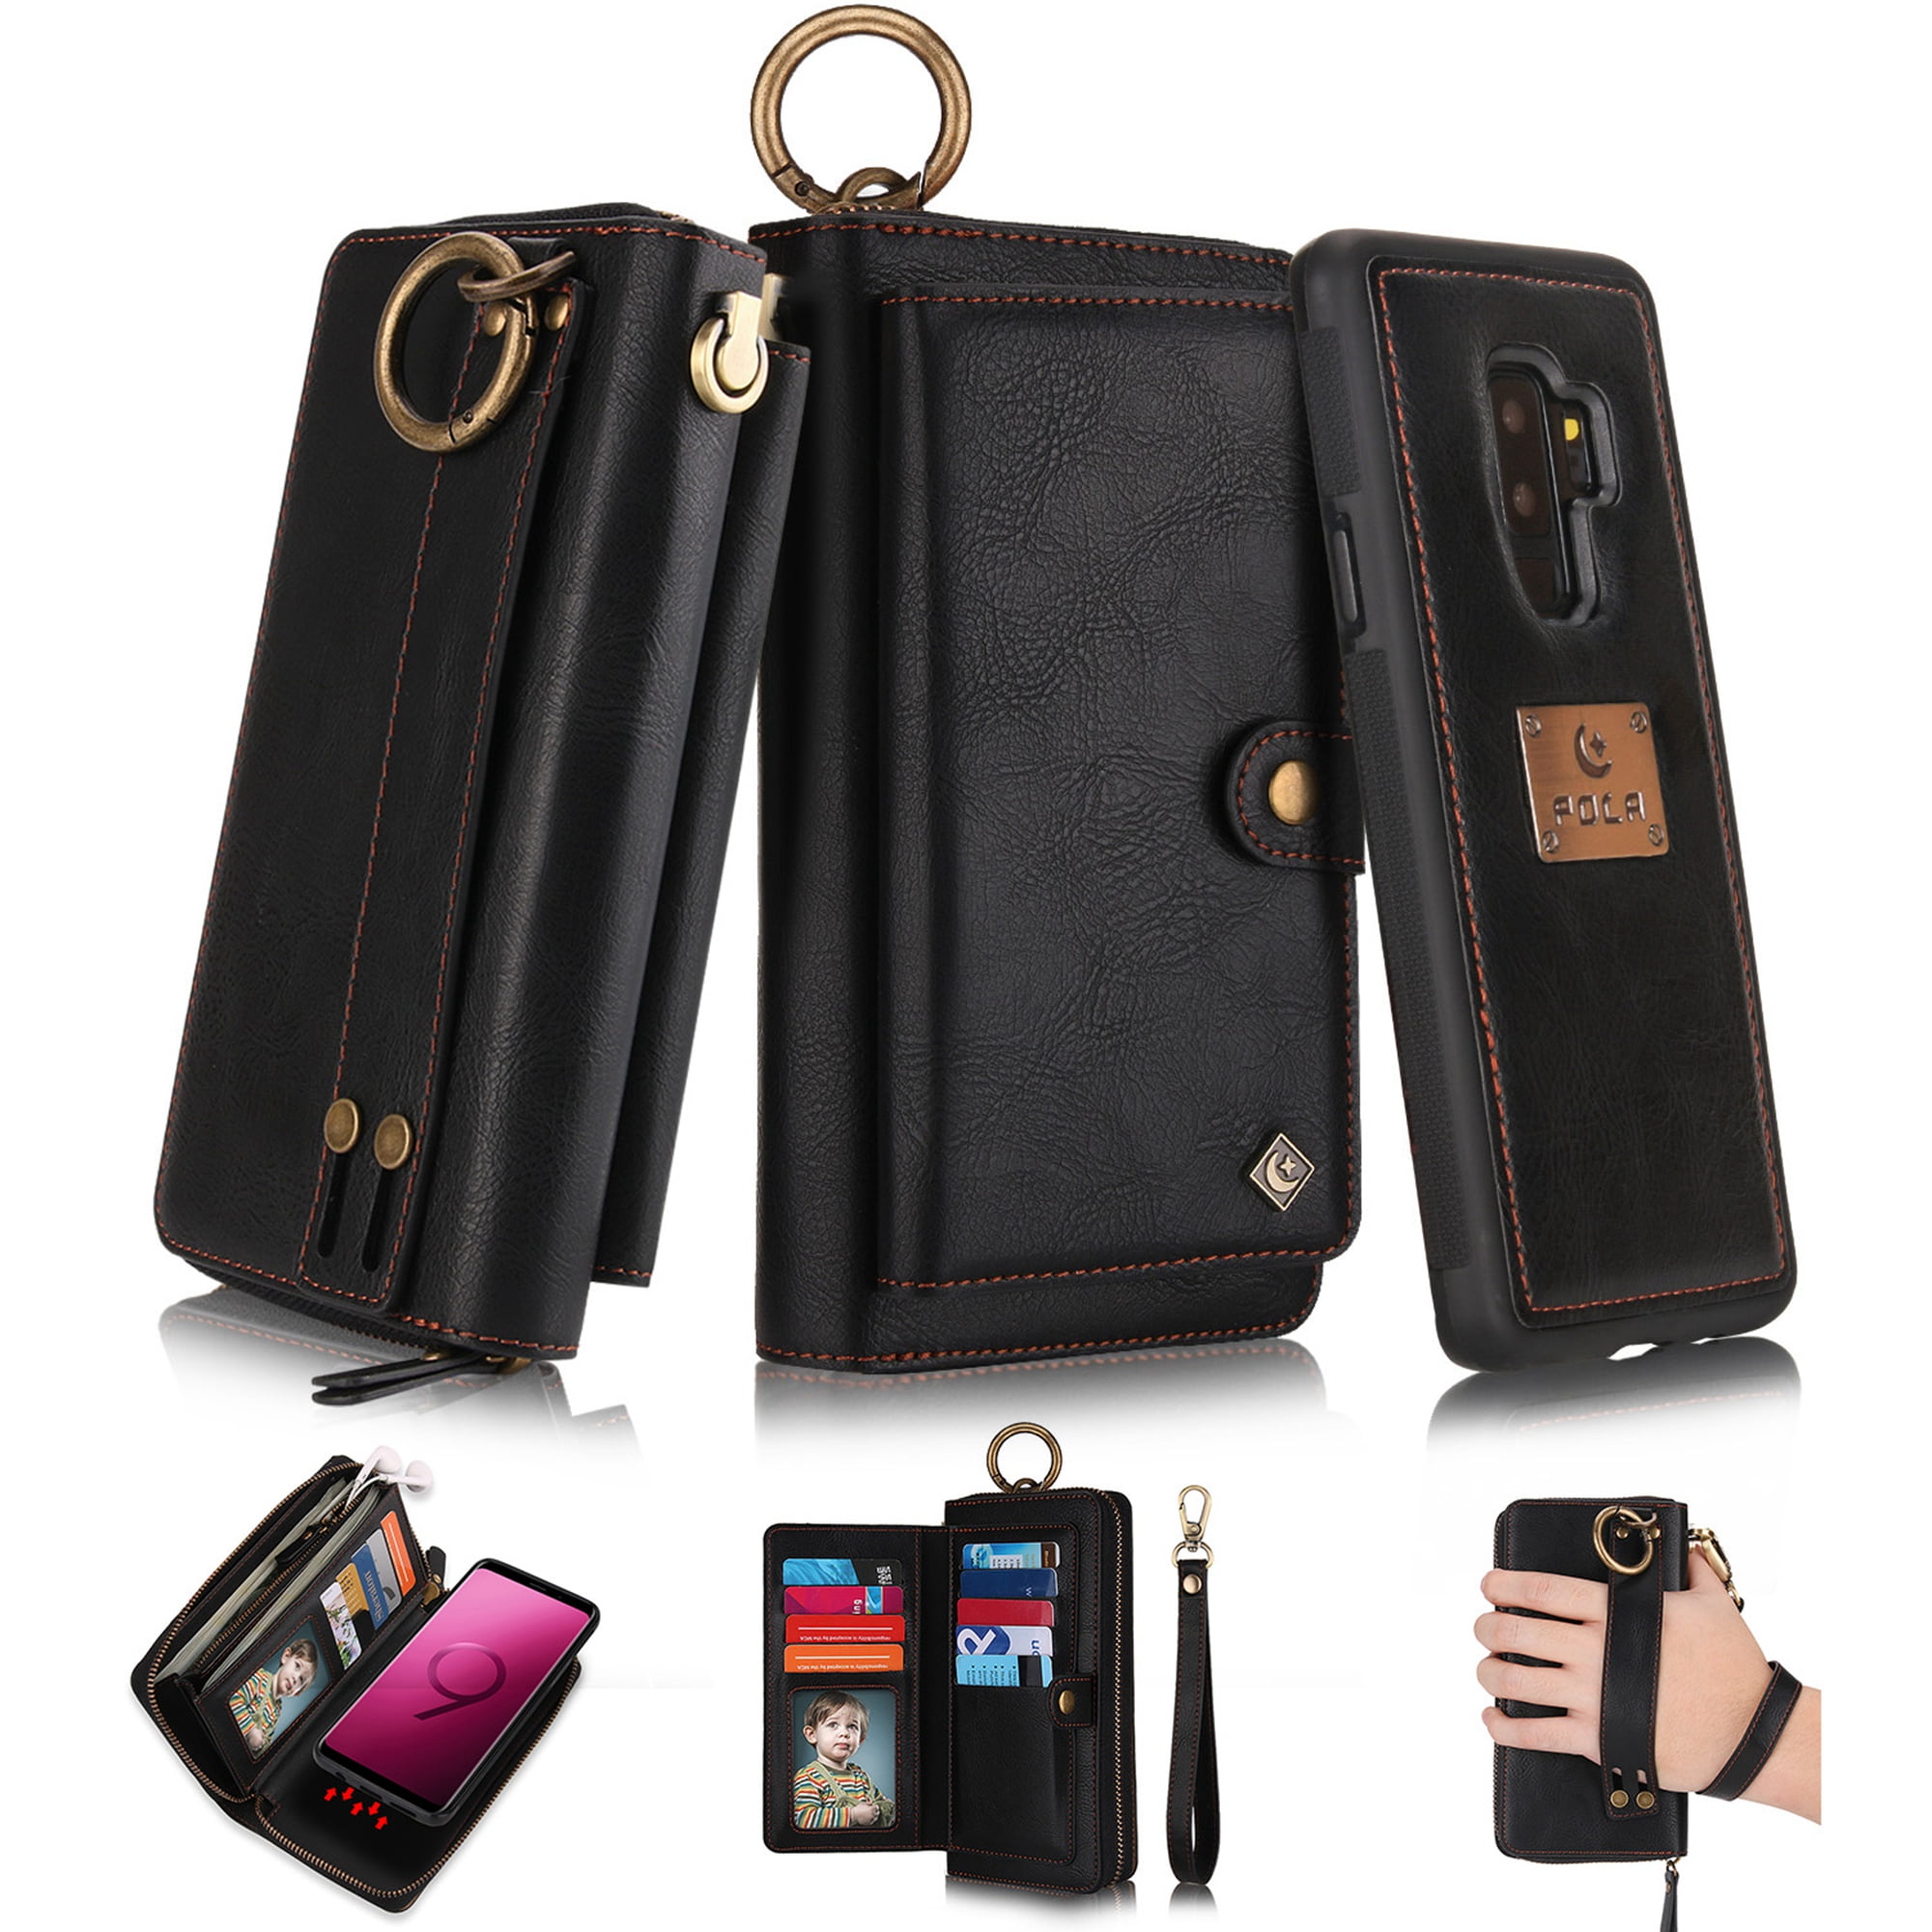 Designer Luxury Purse Case For IPhone 15 14 Pro Max 13 12 11 Pro Max Pro 7  8 Plus, With Logo Box From Phonecase_, $5.21 | DHgate.Com